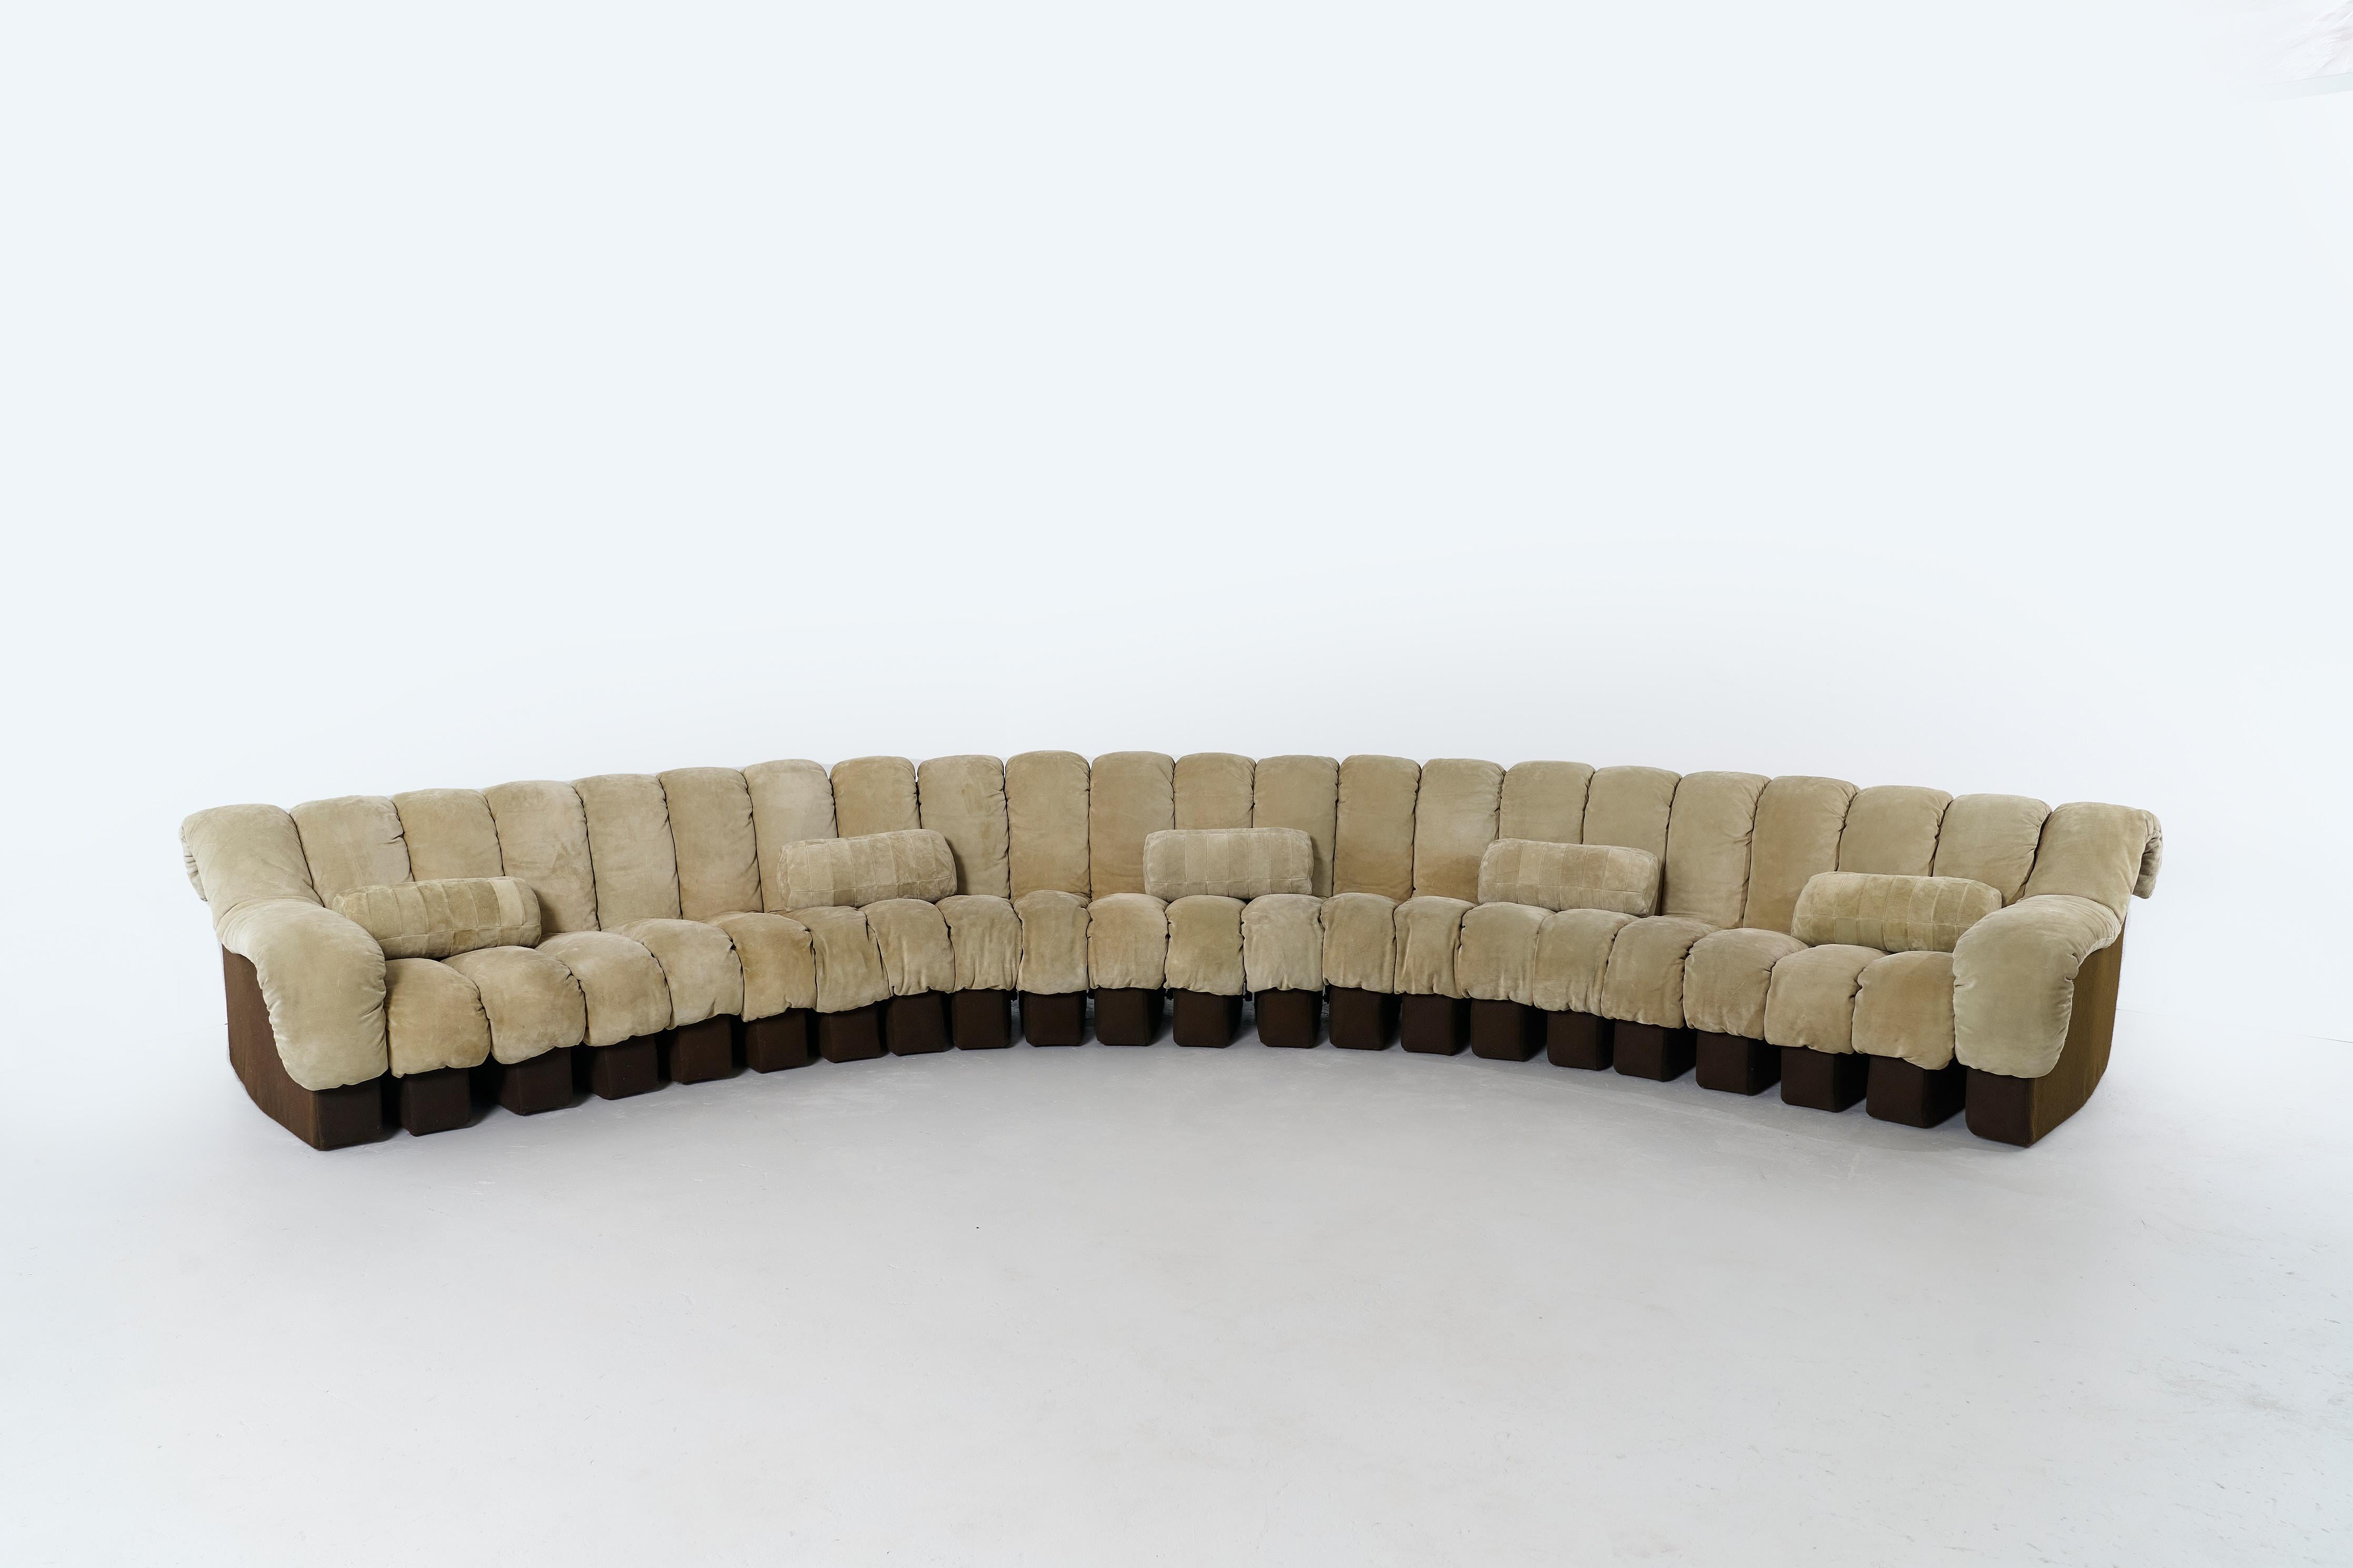 Swiss DS600 Modular Non Stop Sofa by Ueli Berger for De Sede. Set of 22 Pieces For Sale